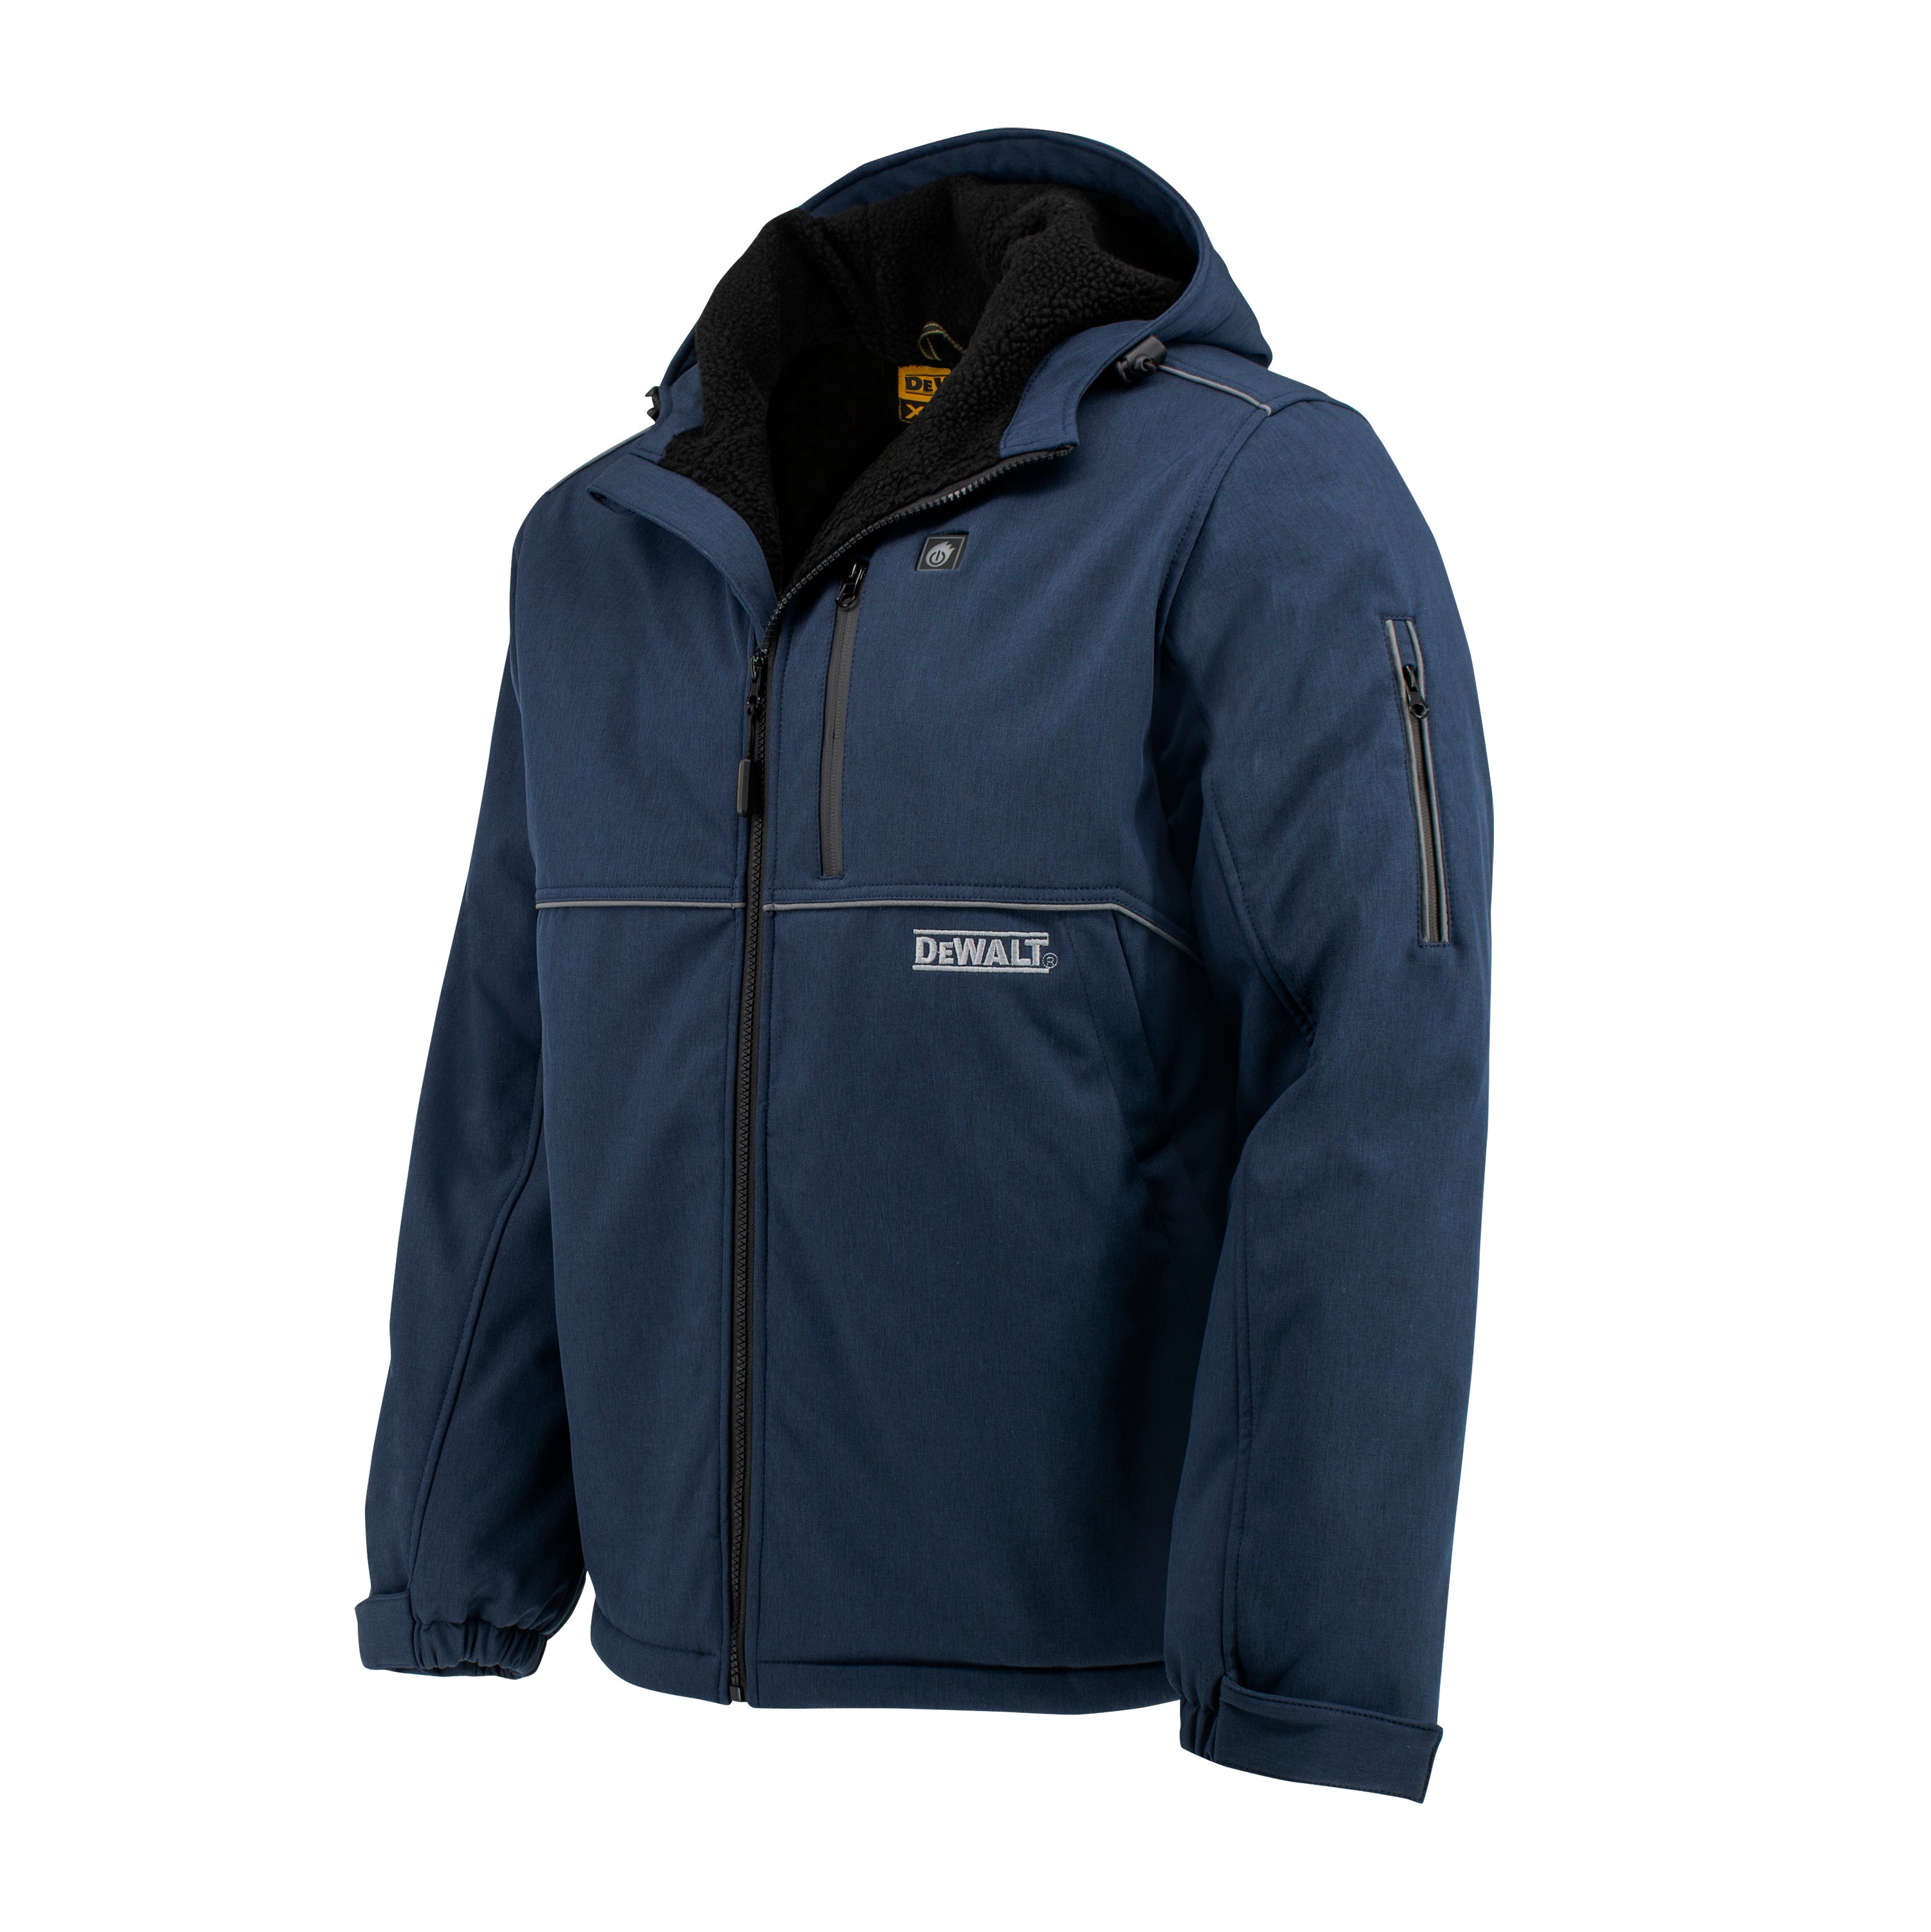 Men's Heated Soft Shell Jacket with Sherpa Lining Kitted - Navy